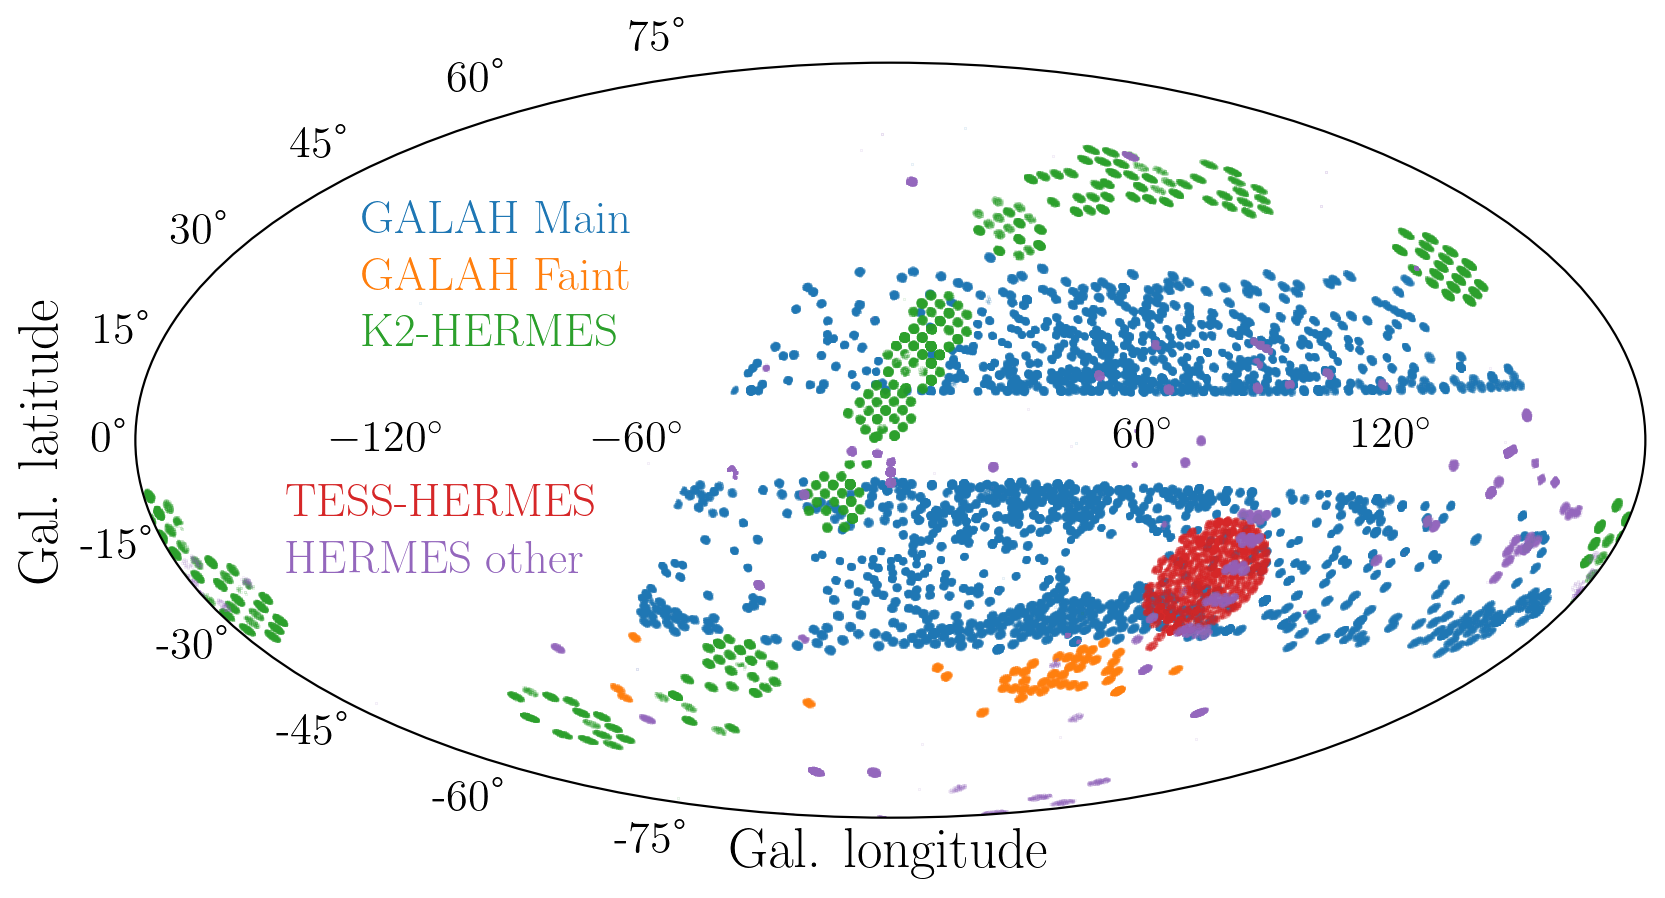 This picture shows spatial coverage of stars observed with HERMES